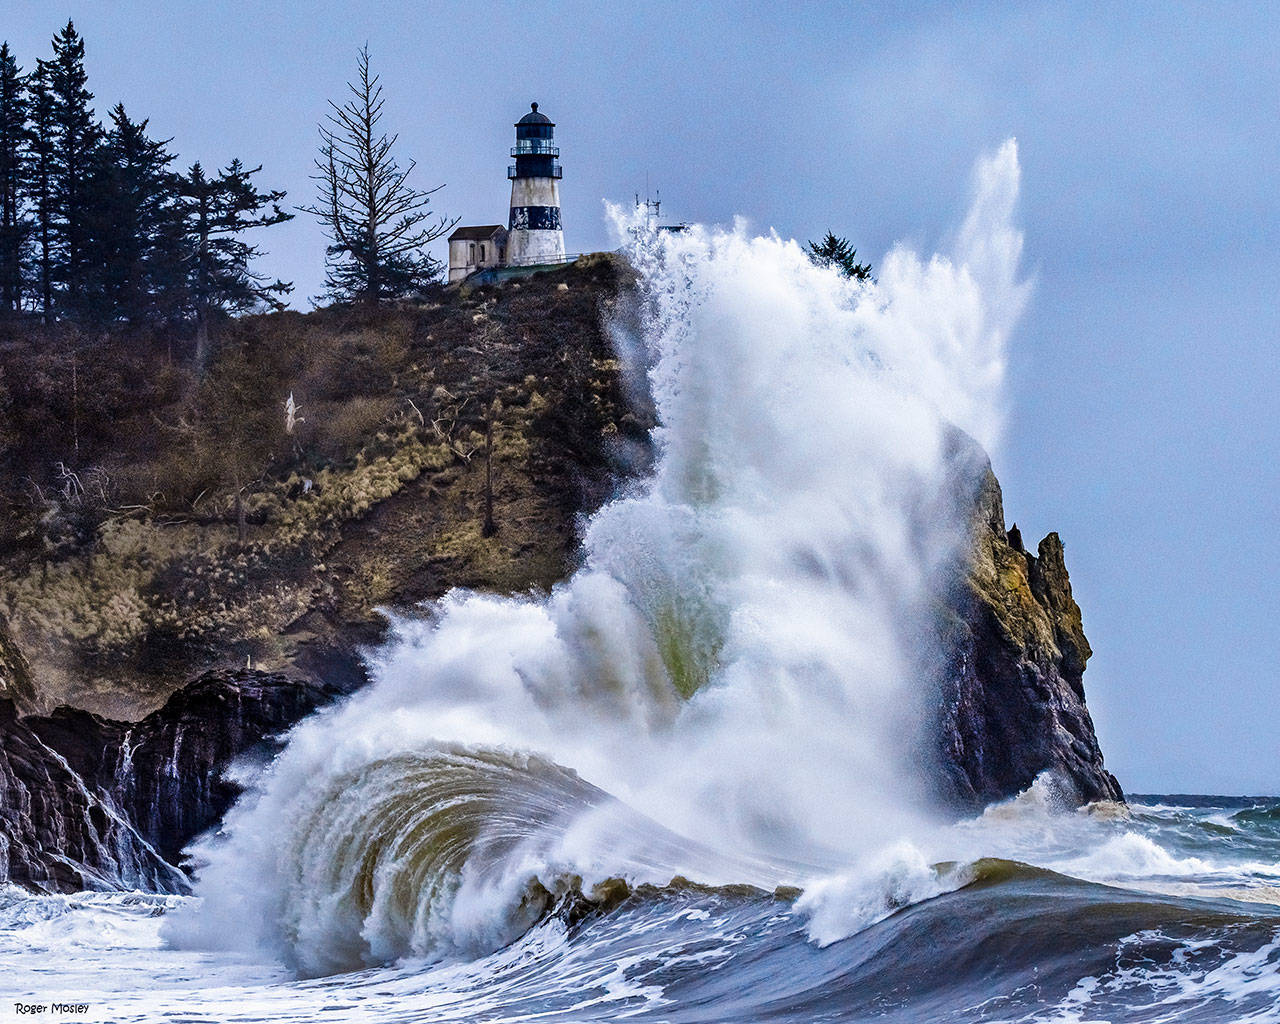 "Cape Disappointment" by Roger Mosley, featured artist at Harbor Art Gallery in January and February 2021. Submitted photo